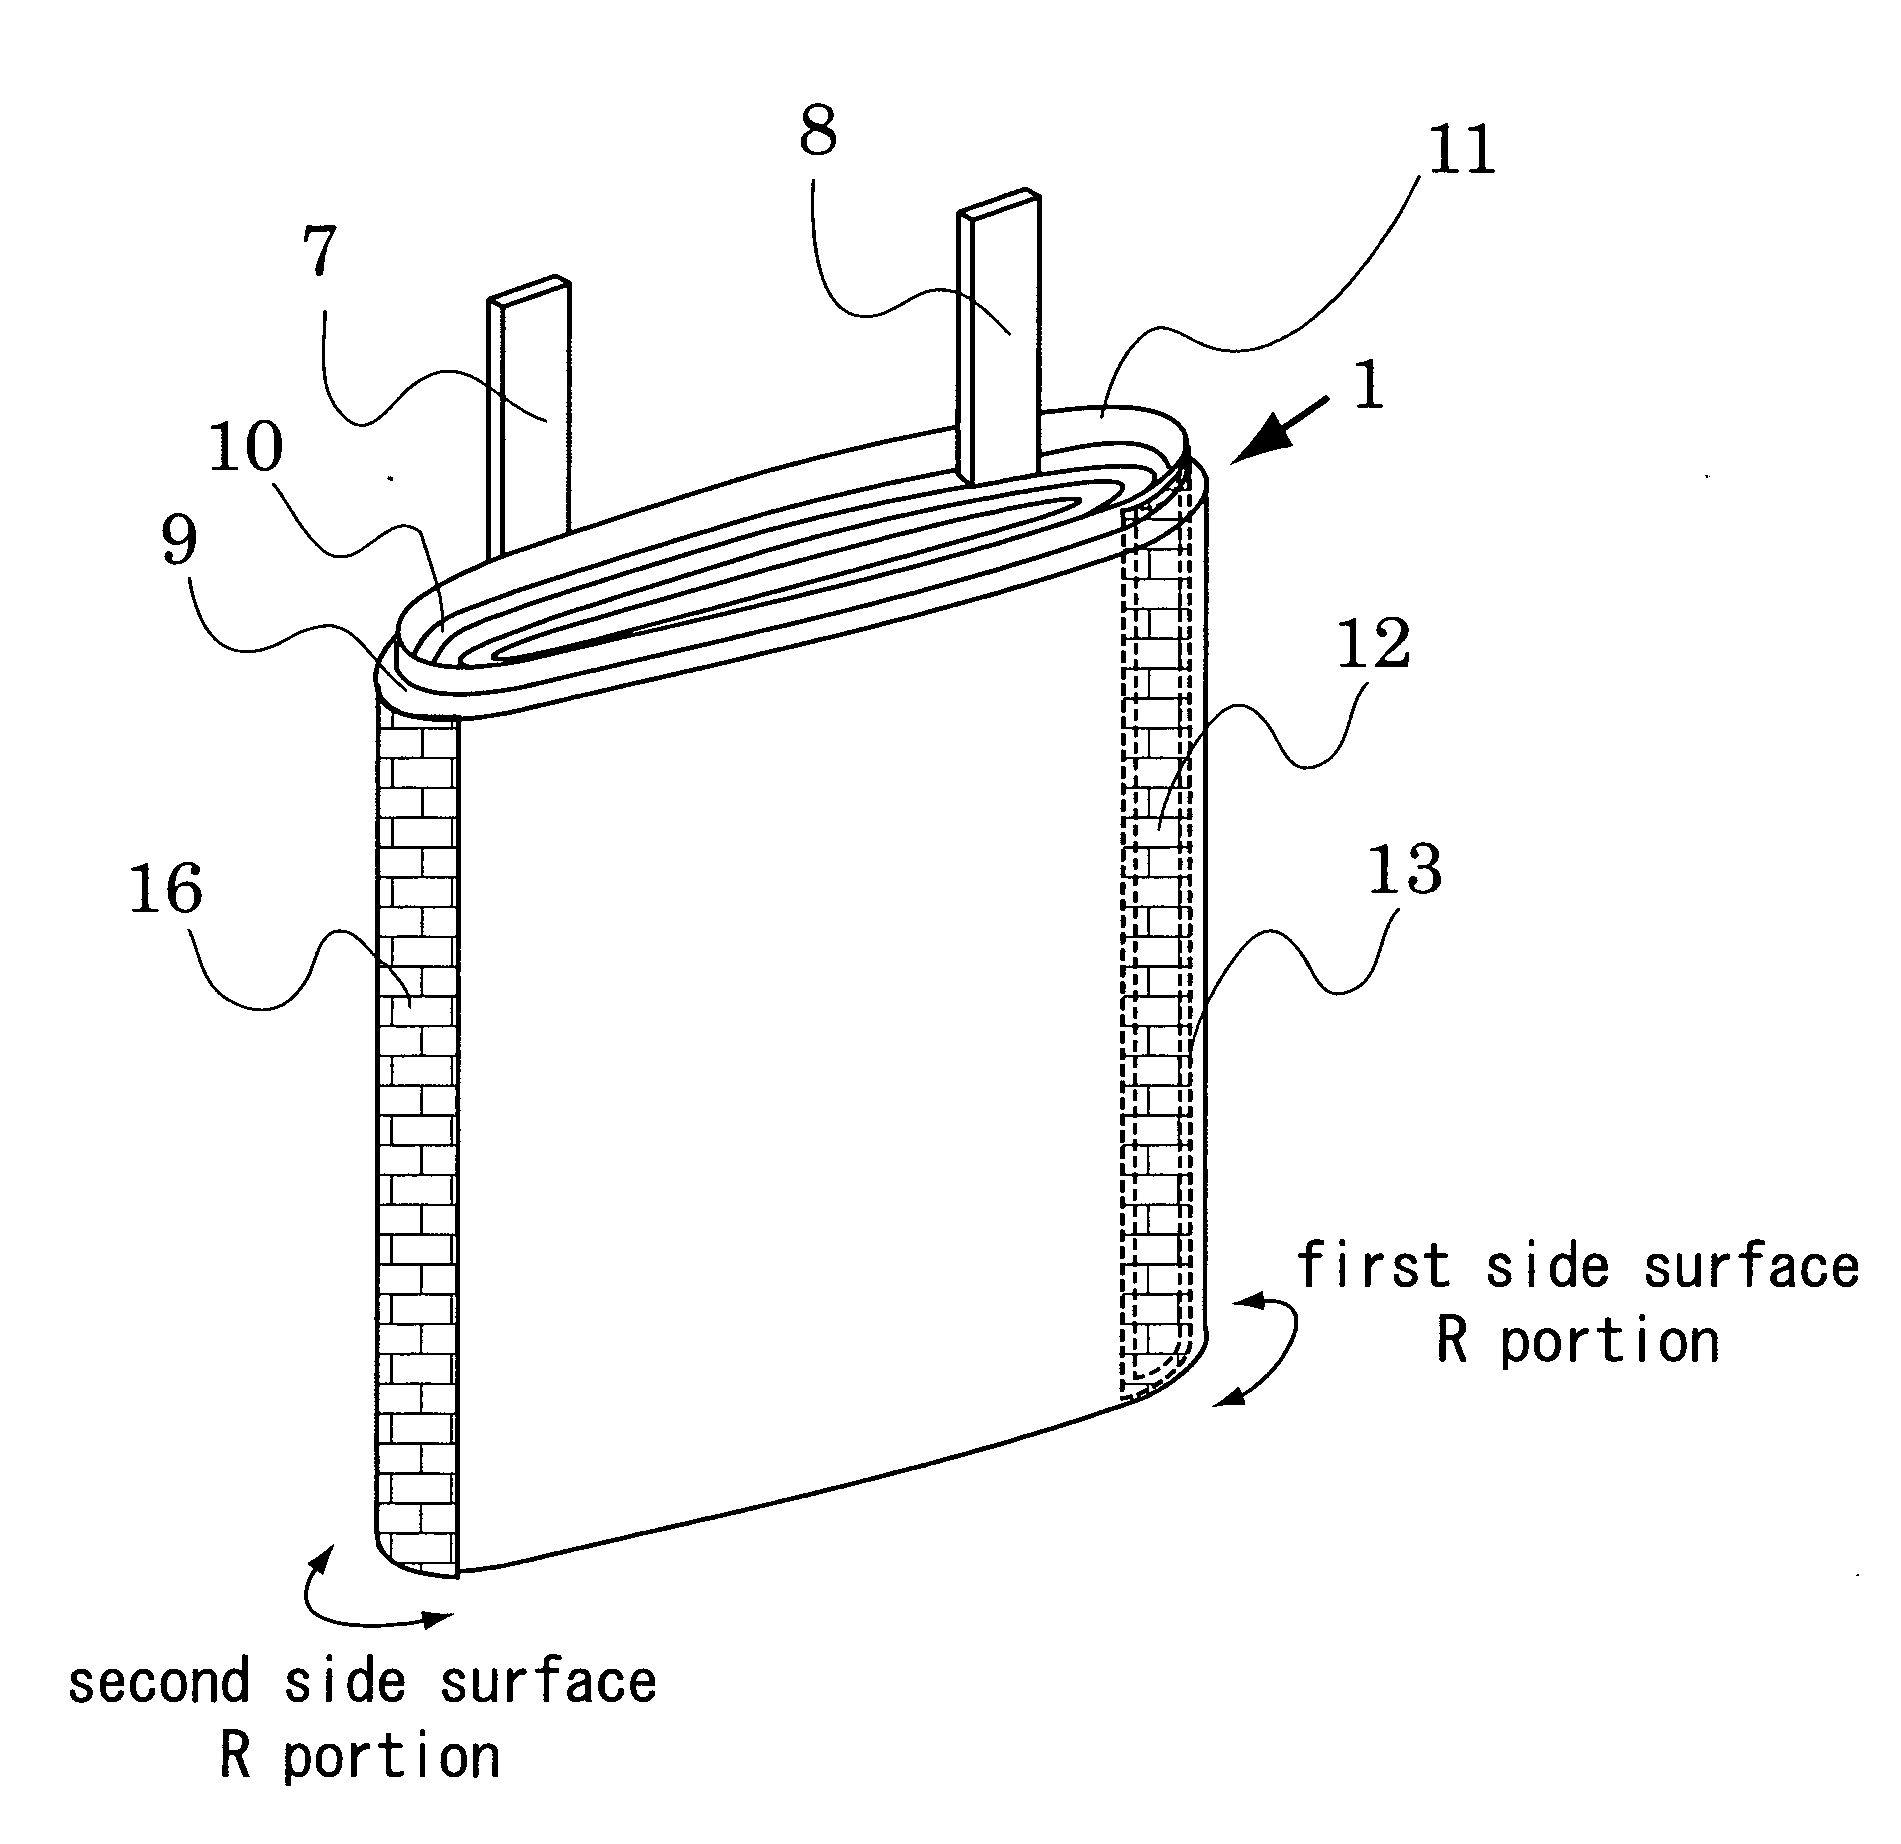 Sealed cell using film outer casing body